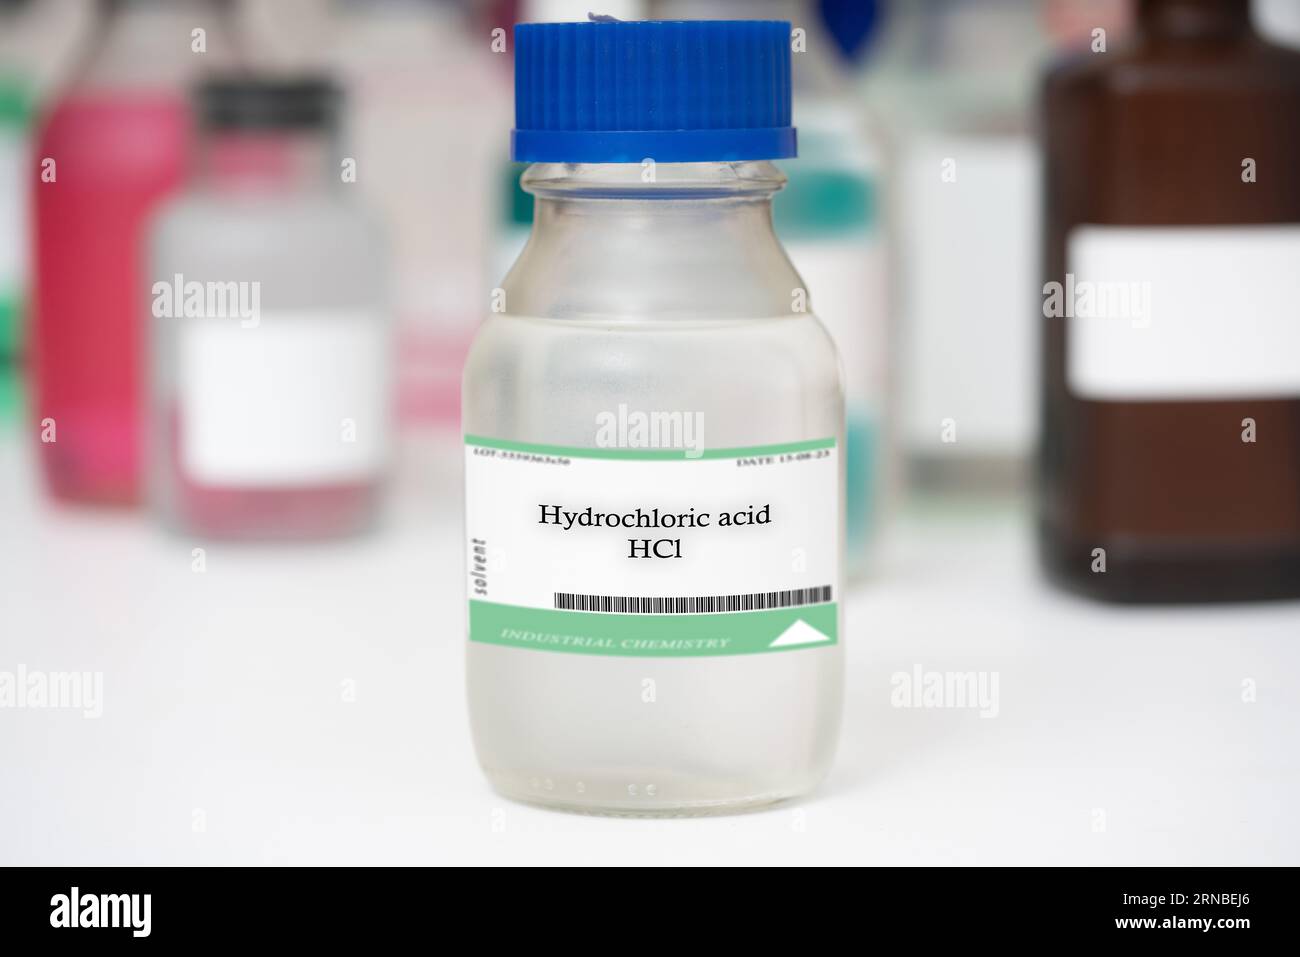 Hydrochloric acid A highly corrosive liquid used as a solvent and in the production of various chemicals, such as fertilizers and dyes. Stock Photo